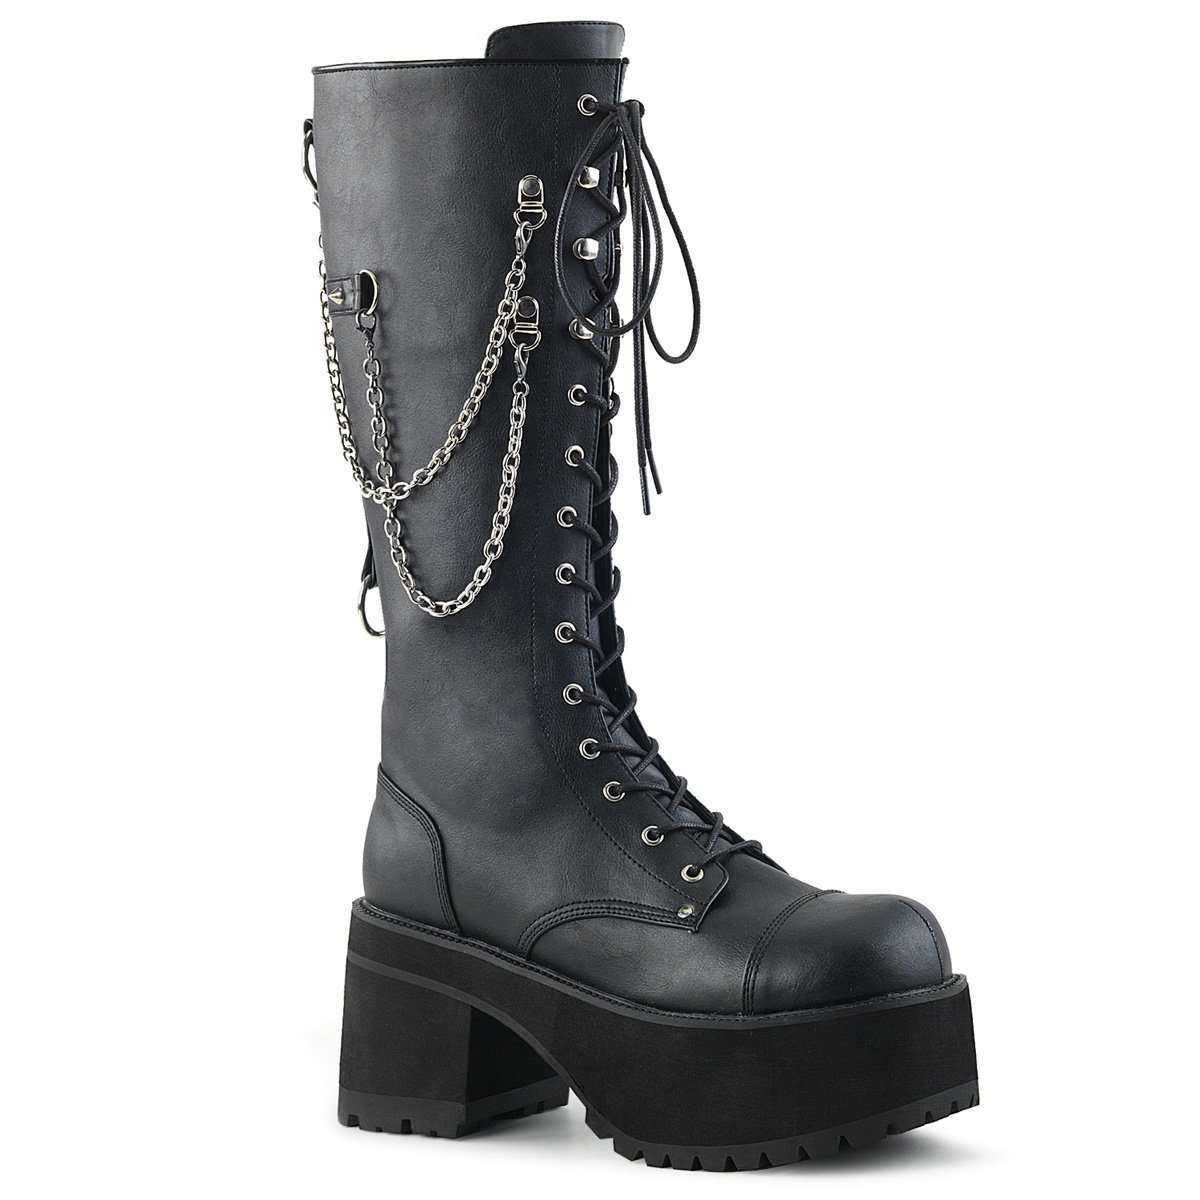 Demonia Platform Boots - Ranger 303 Lace-up Platform Boot with Chains